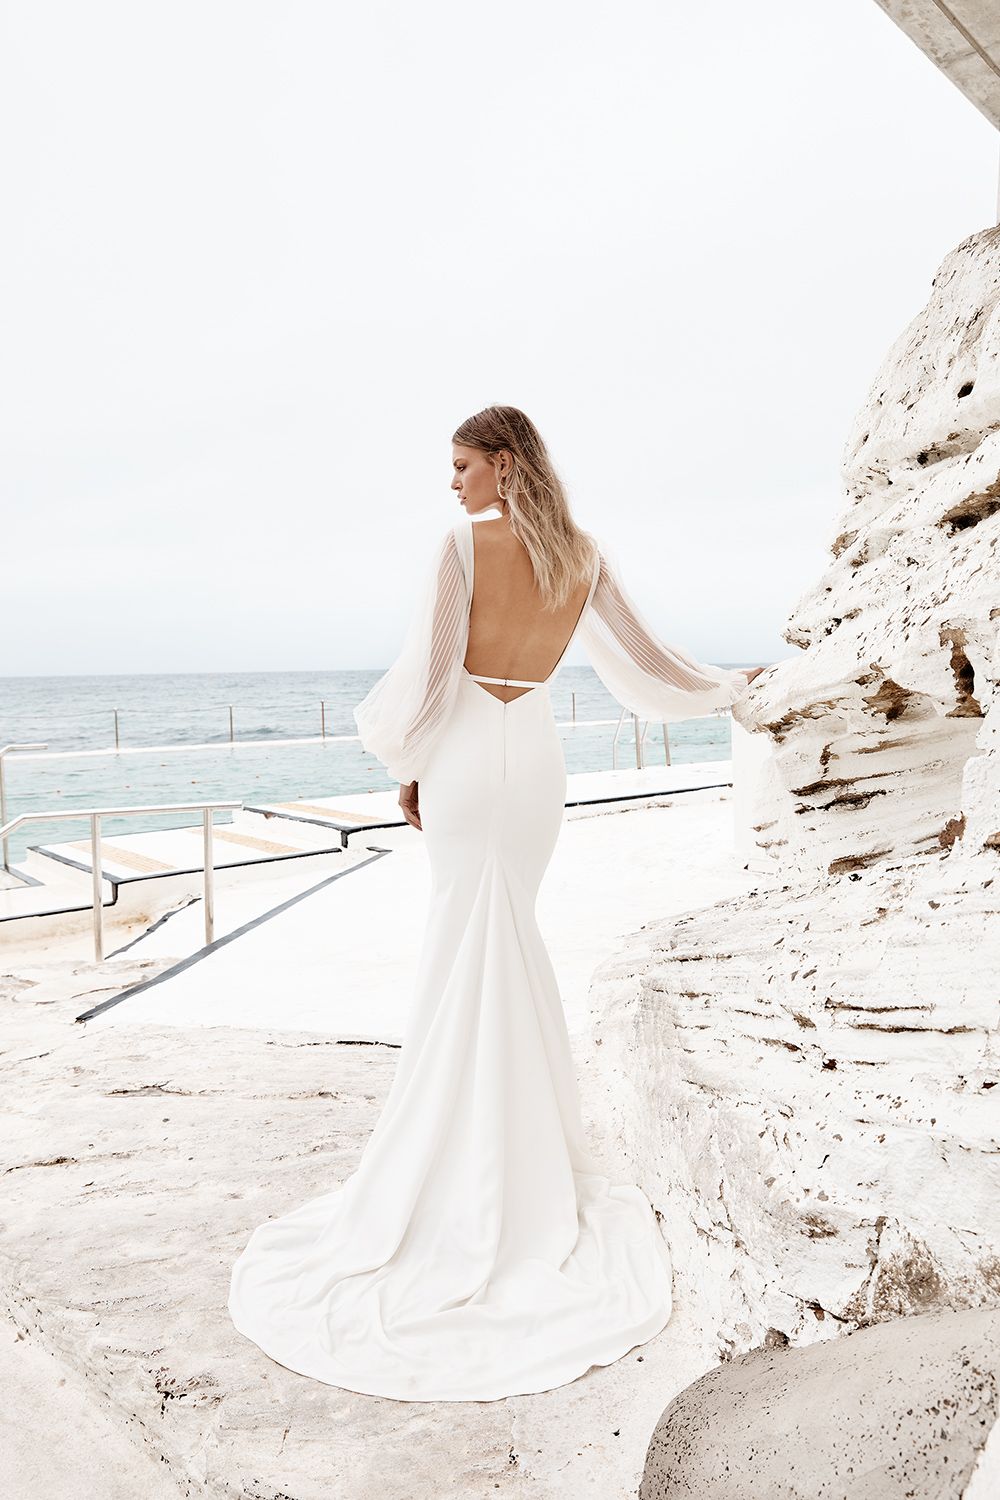 Melrose gown chosen by one day